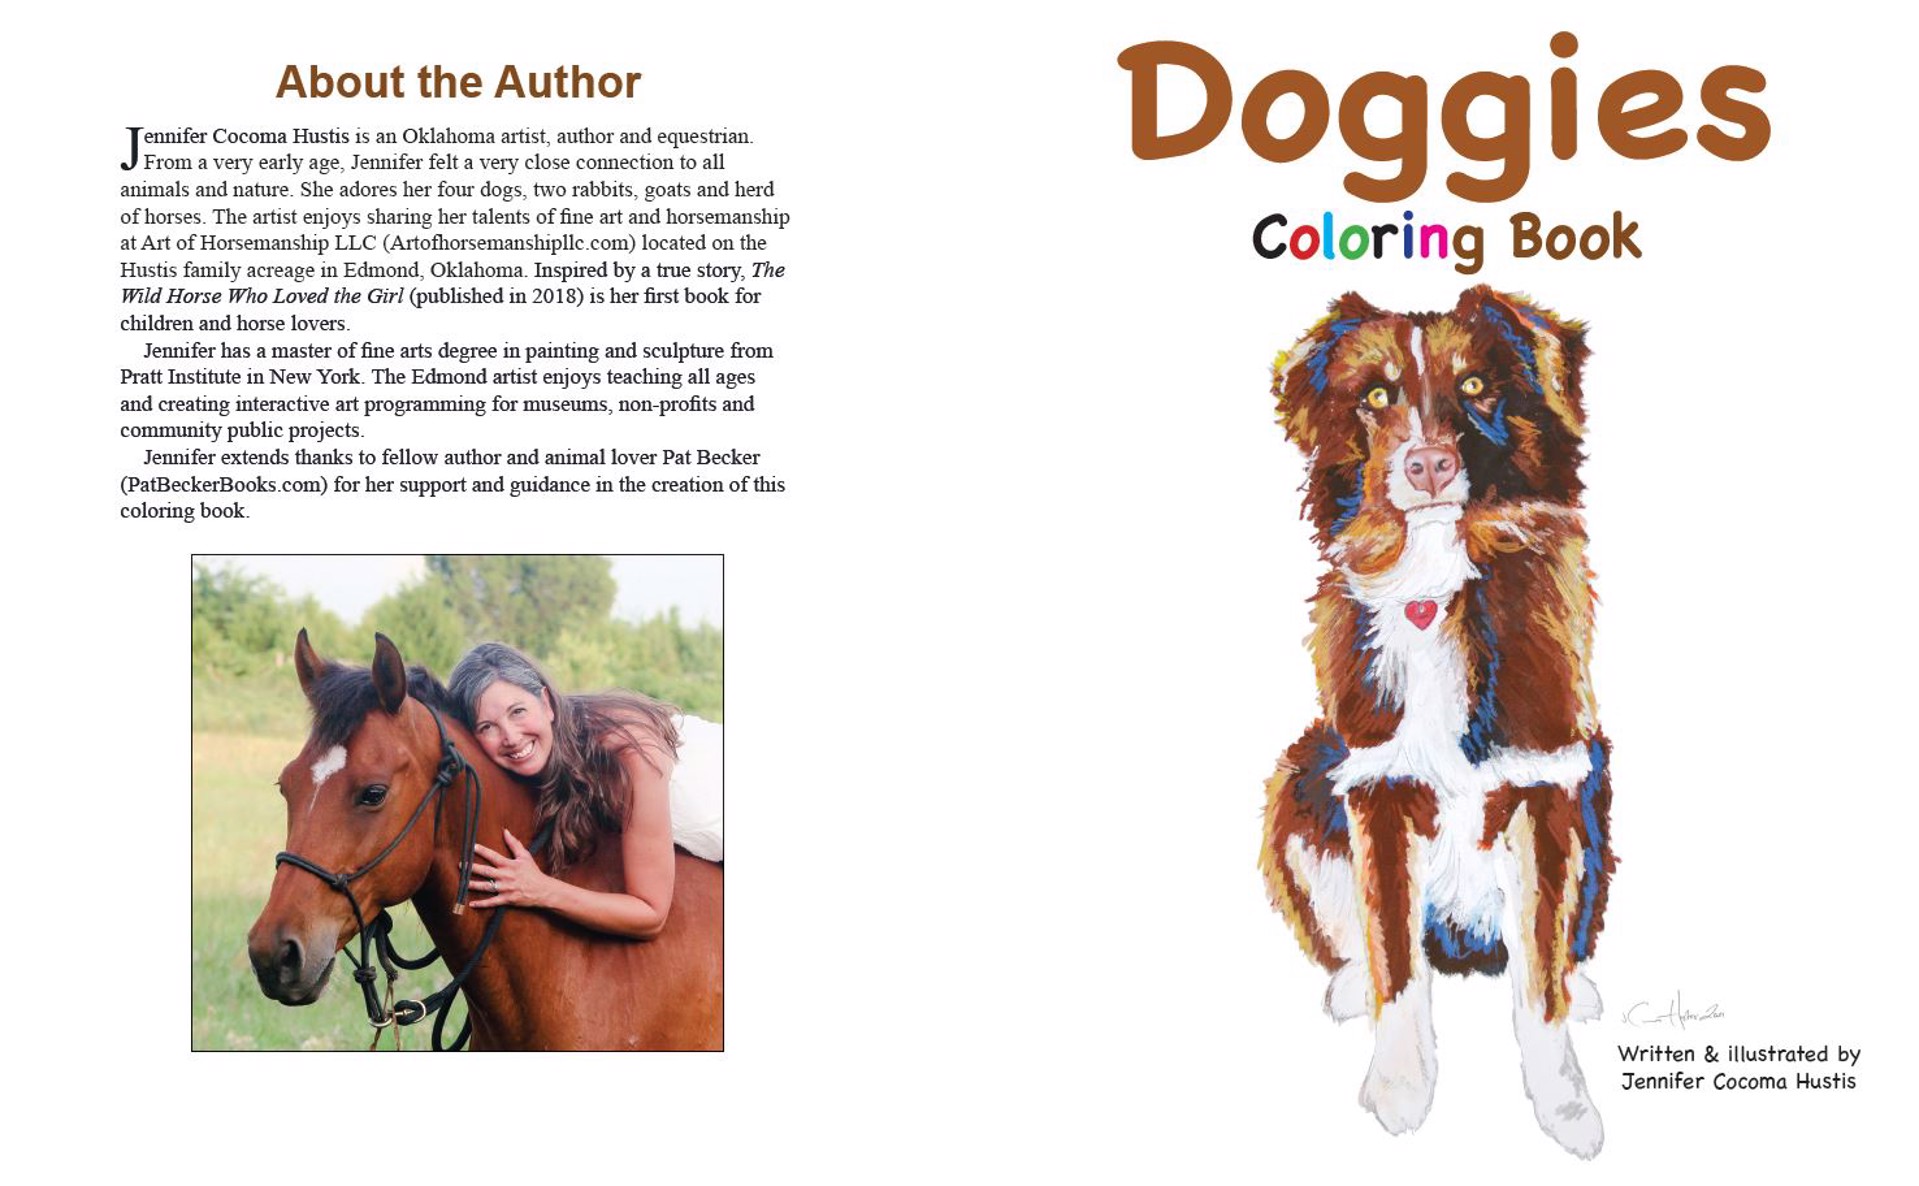 Doggies Coloring Book by Jennifer Cocoma Hustis